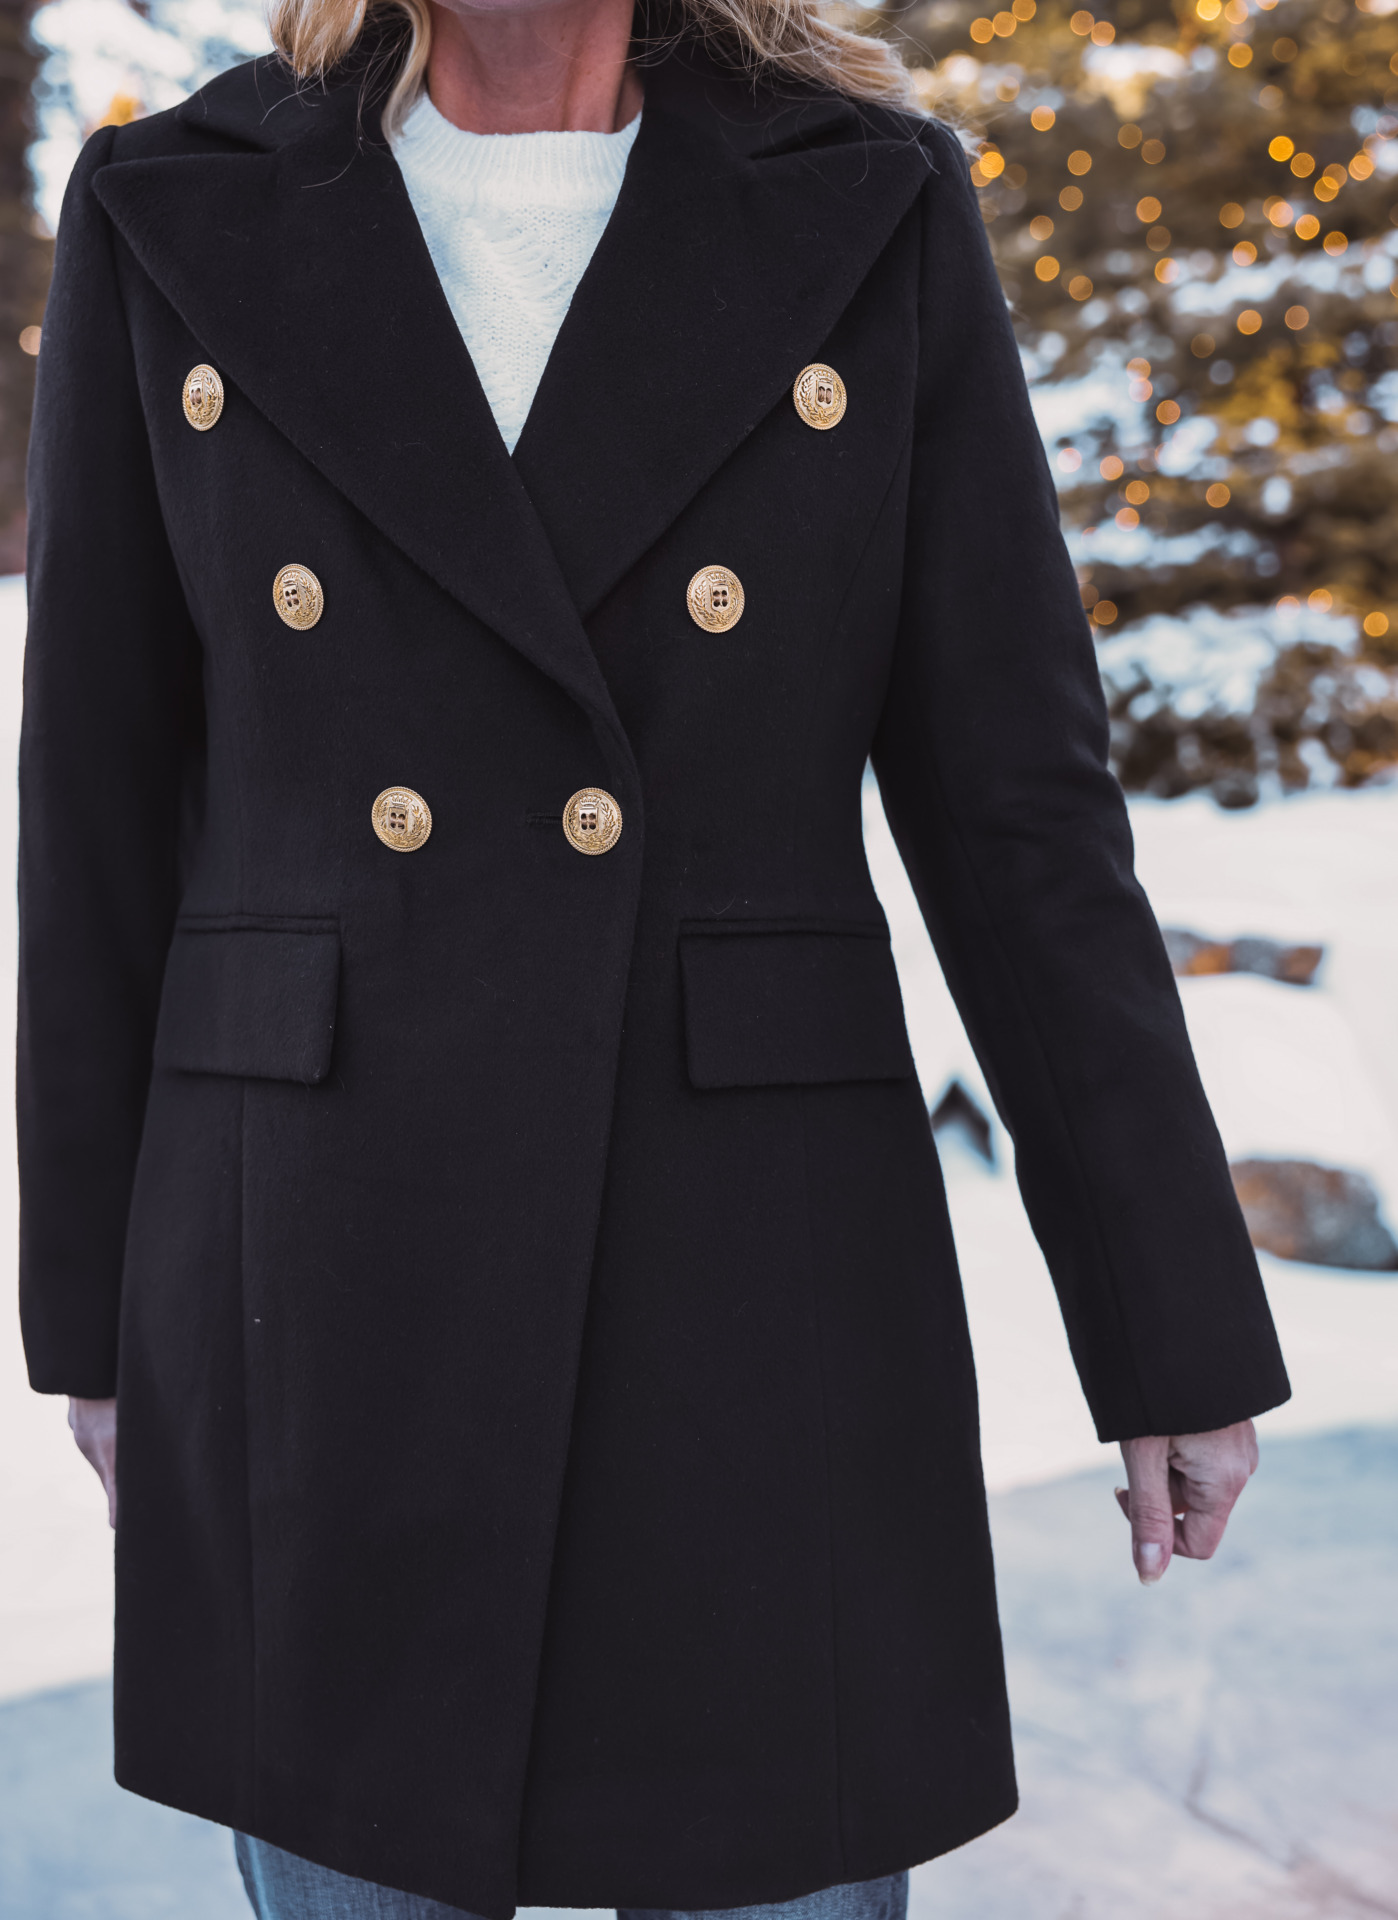 Sam Edelman Wool Military Coat | Warmest Coats and Jackets for Winter